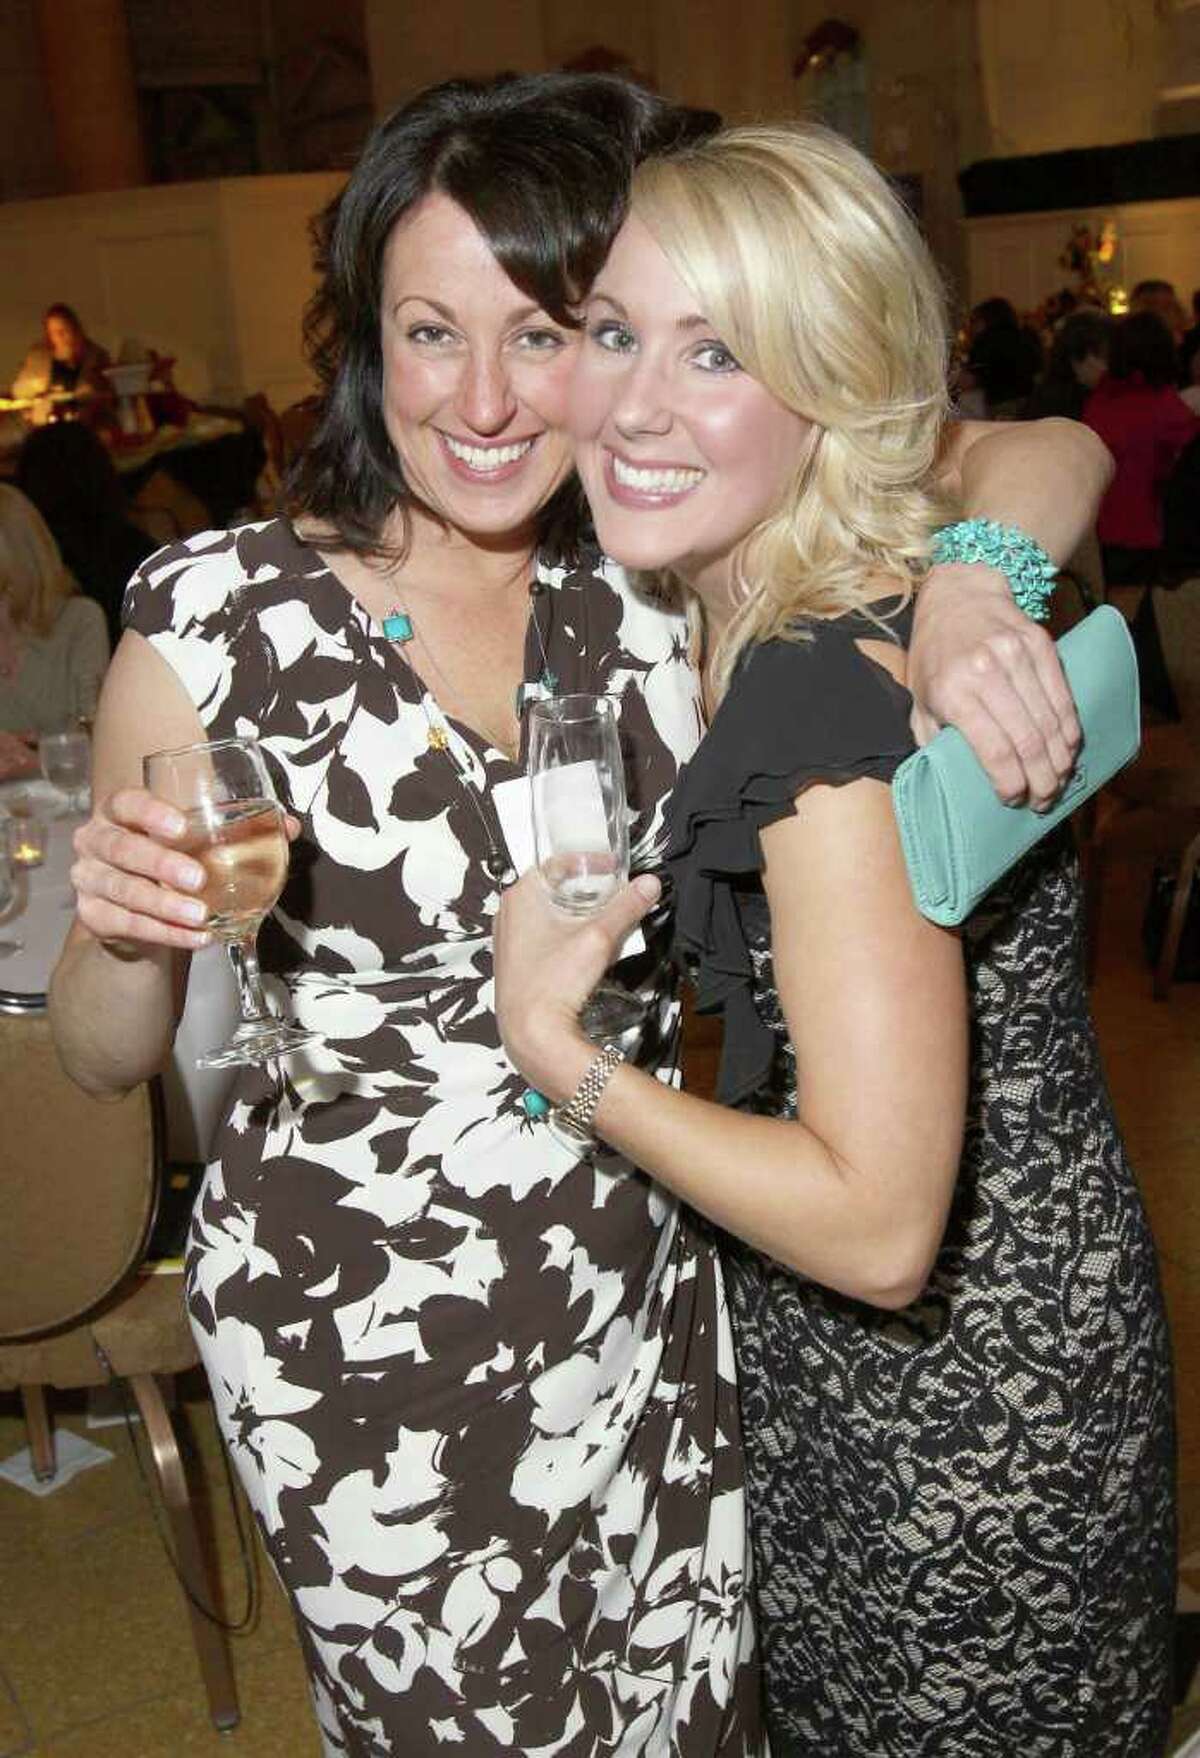 Maryjo Aidala, left, and Kelly Bytner during Through the Looking Glass: An Evening to End Alzheimer's, a gala to benefit the Alzheimer's Association of Northeastern New York in Saratoga Springs on May 5, 2011. (Photo by Joe Putrock / Special to the Times Union)